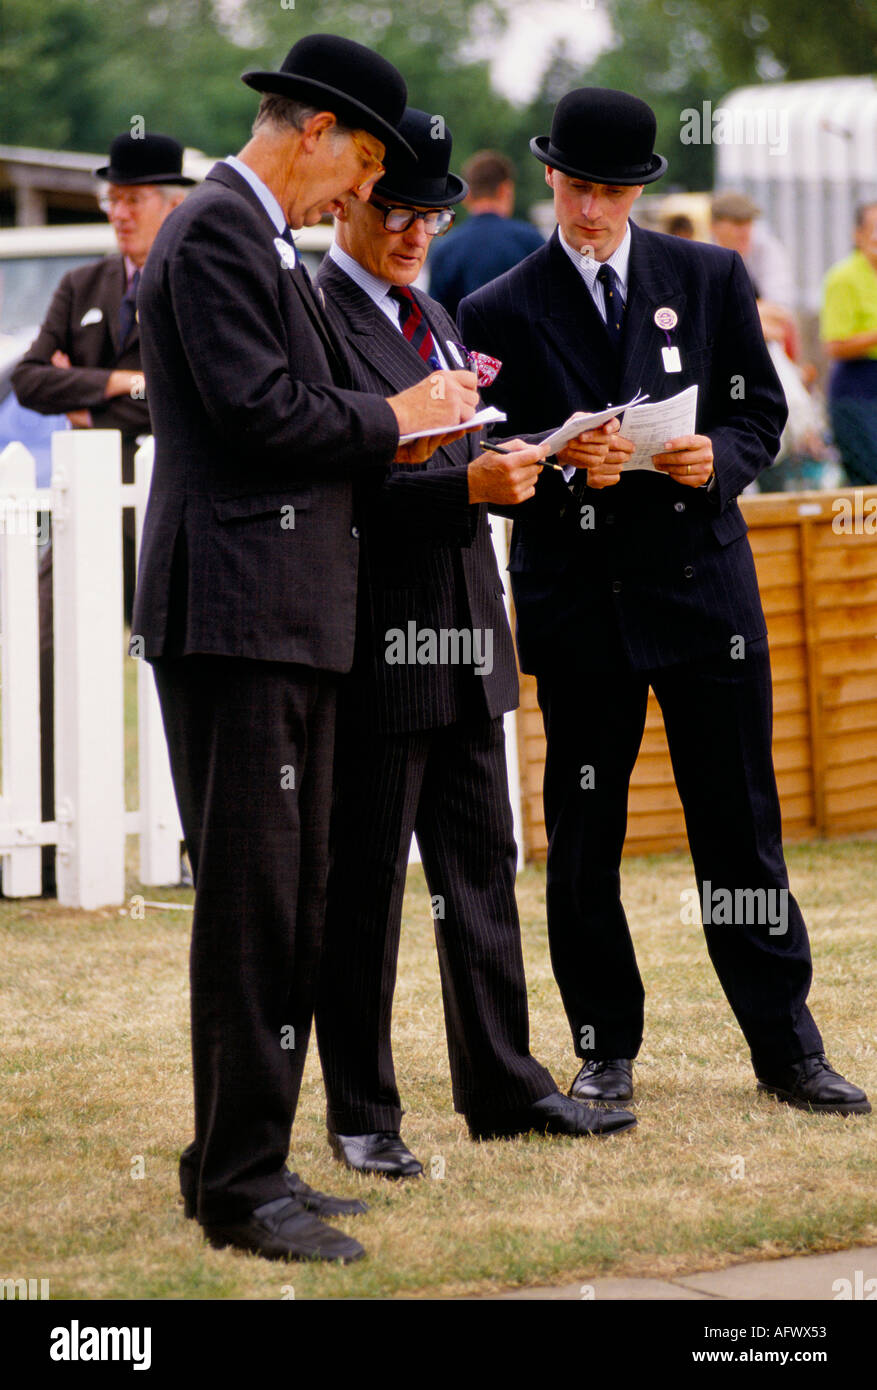 Judges in bowler hats judge the hound puppy show . South of England County  Show. Kent. HOMER SYKES Stock Photo - Alamy